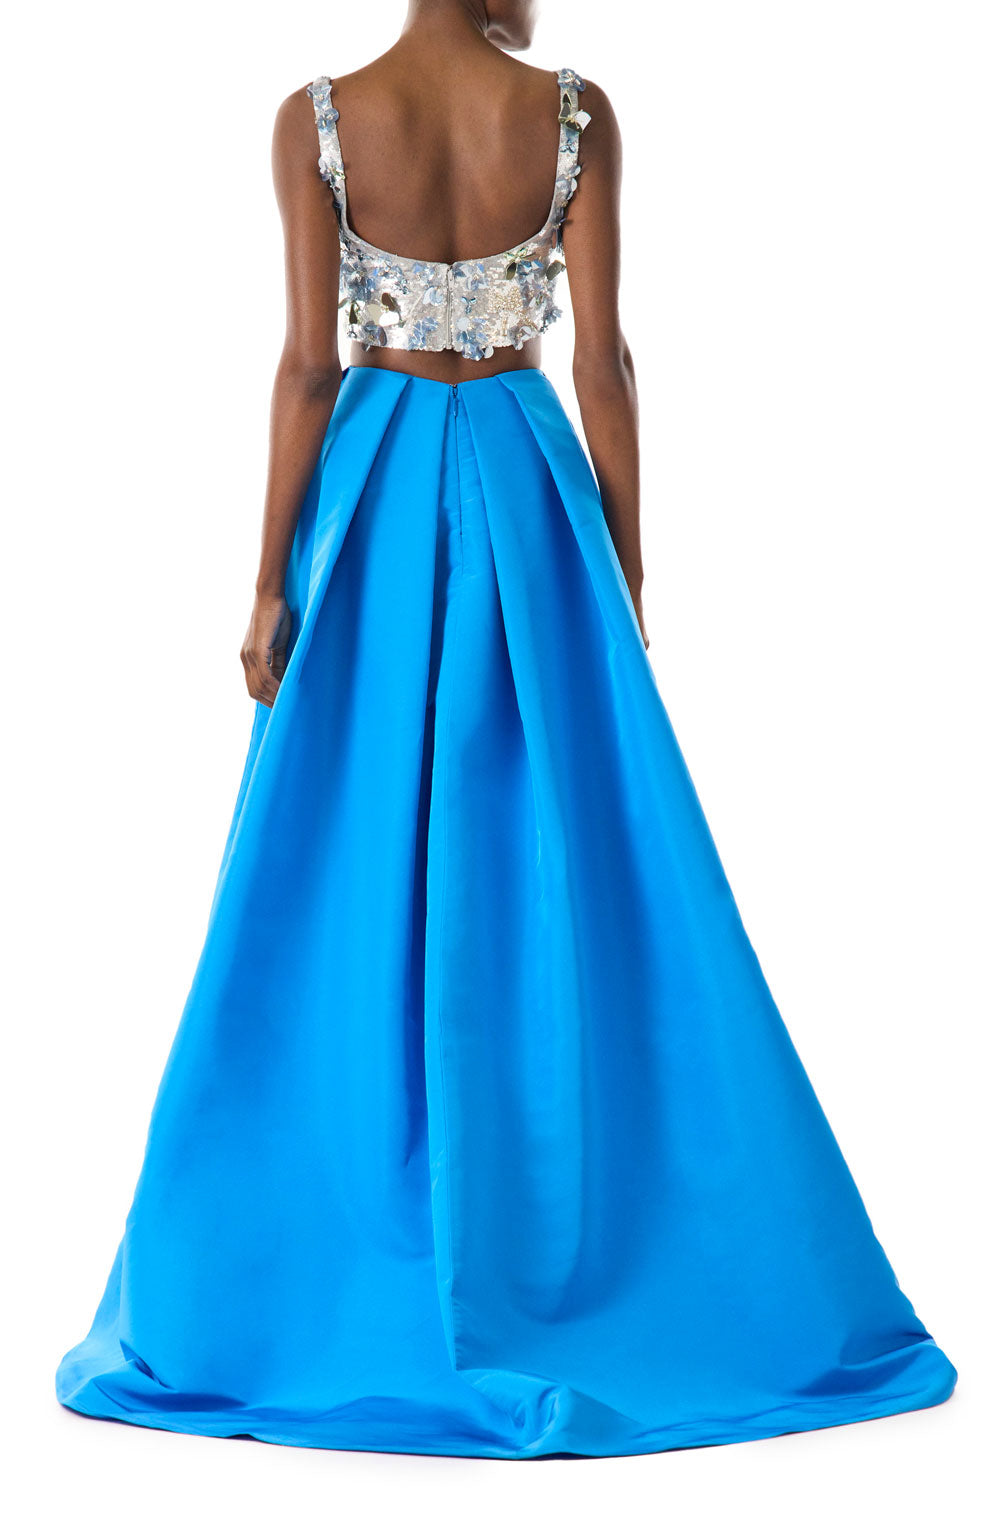 Monique Lhuillier cobalt blue silk faille ballgown skirt with pockets and high slit.  Shown with a silver embroidered crop top.